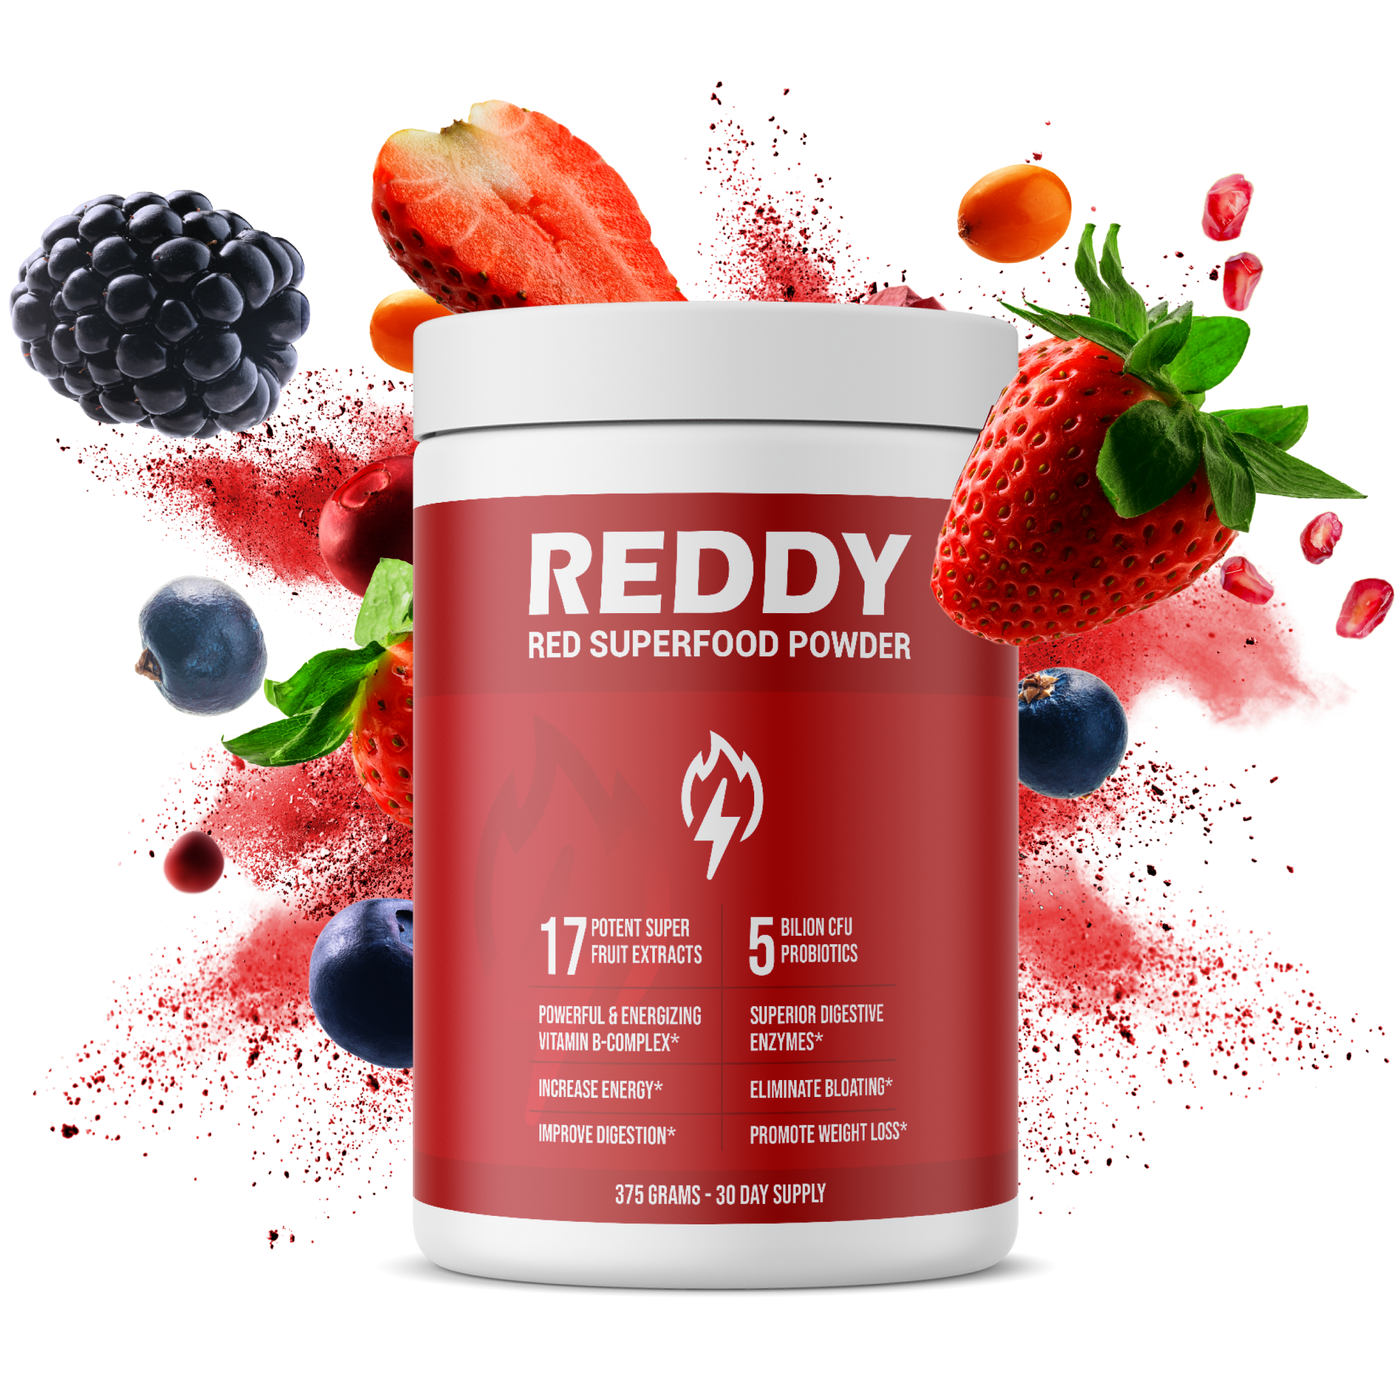 The Benefits of Reddy Red Superfood Powder